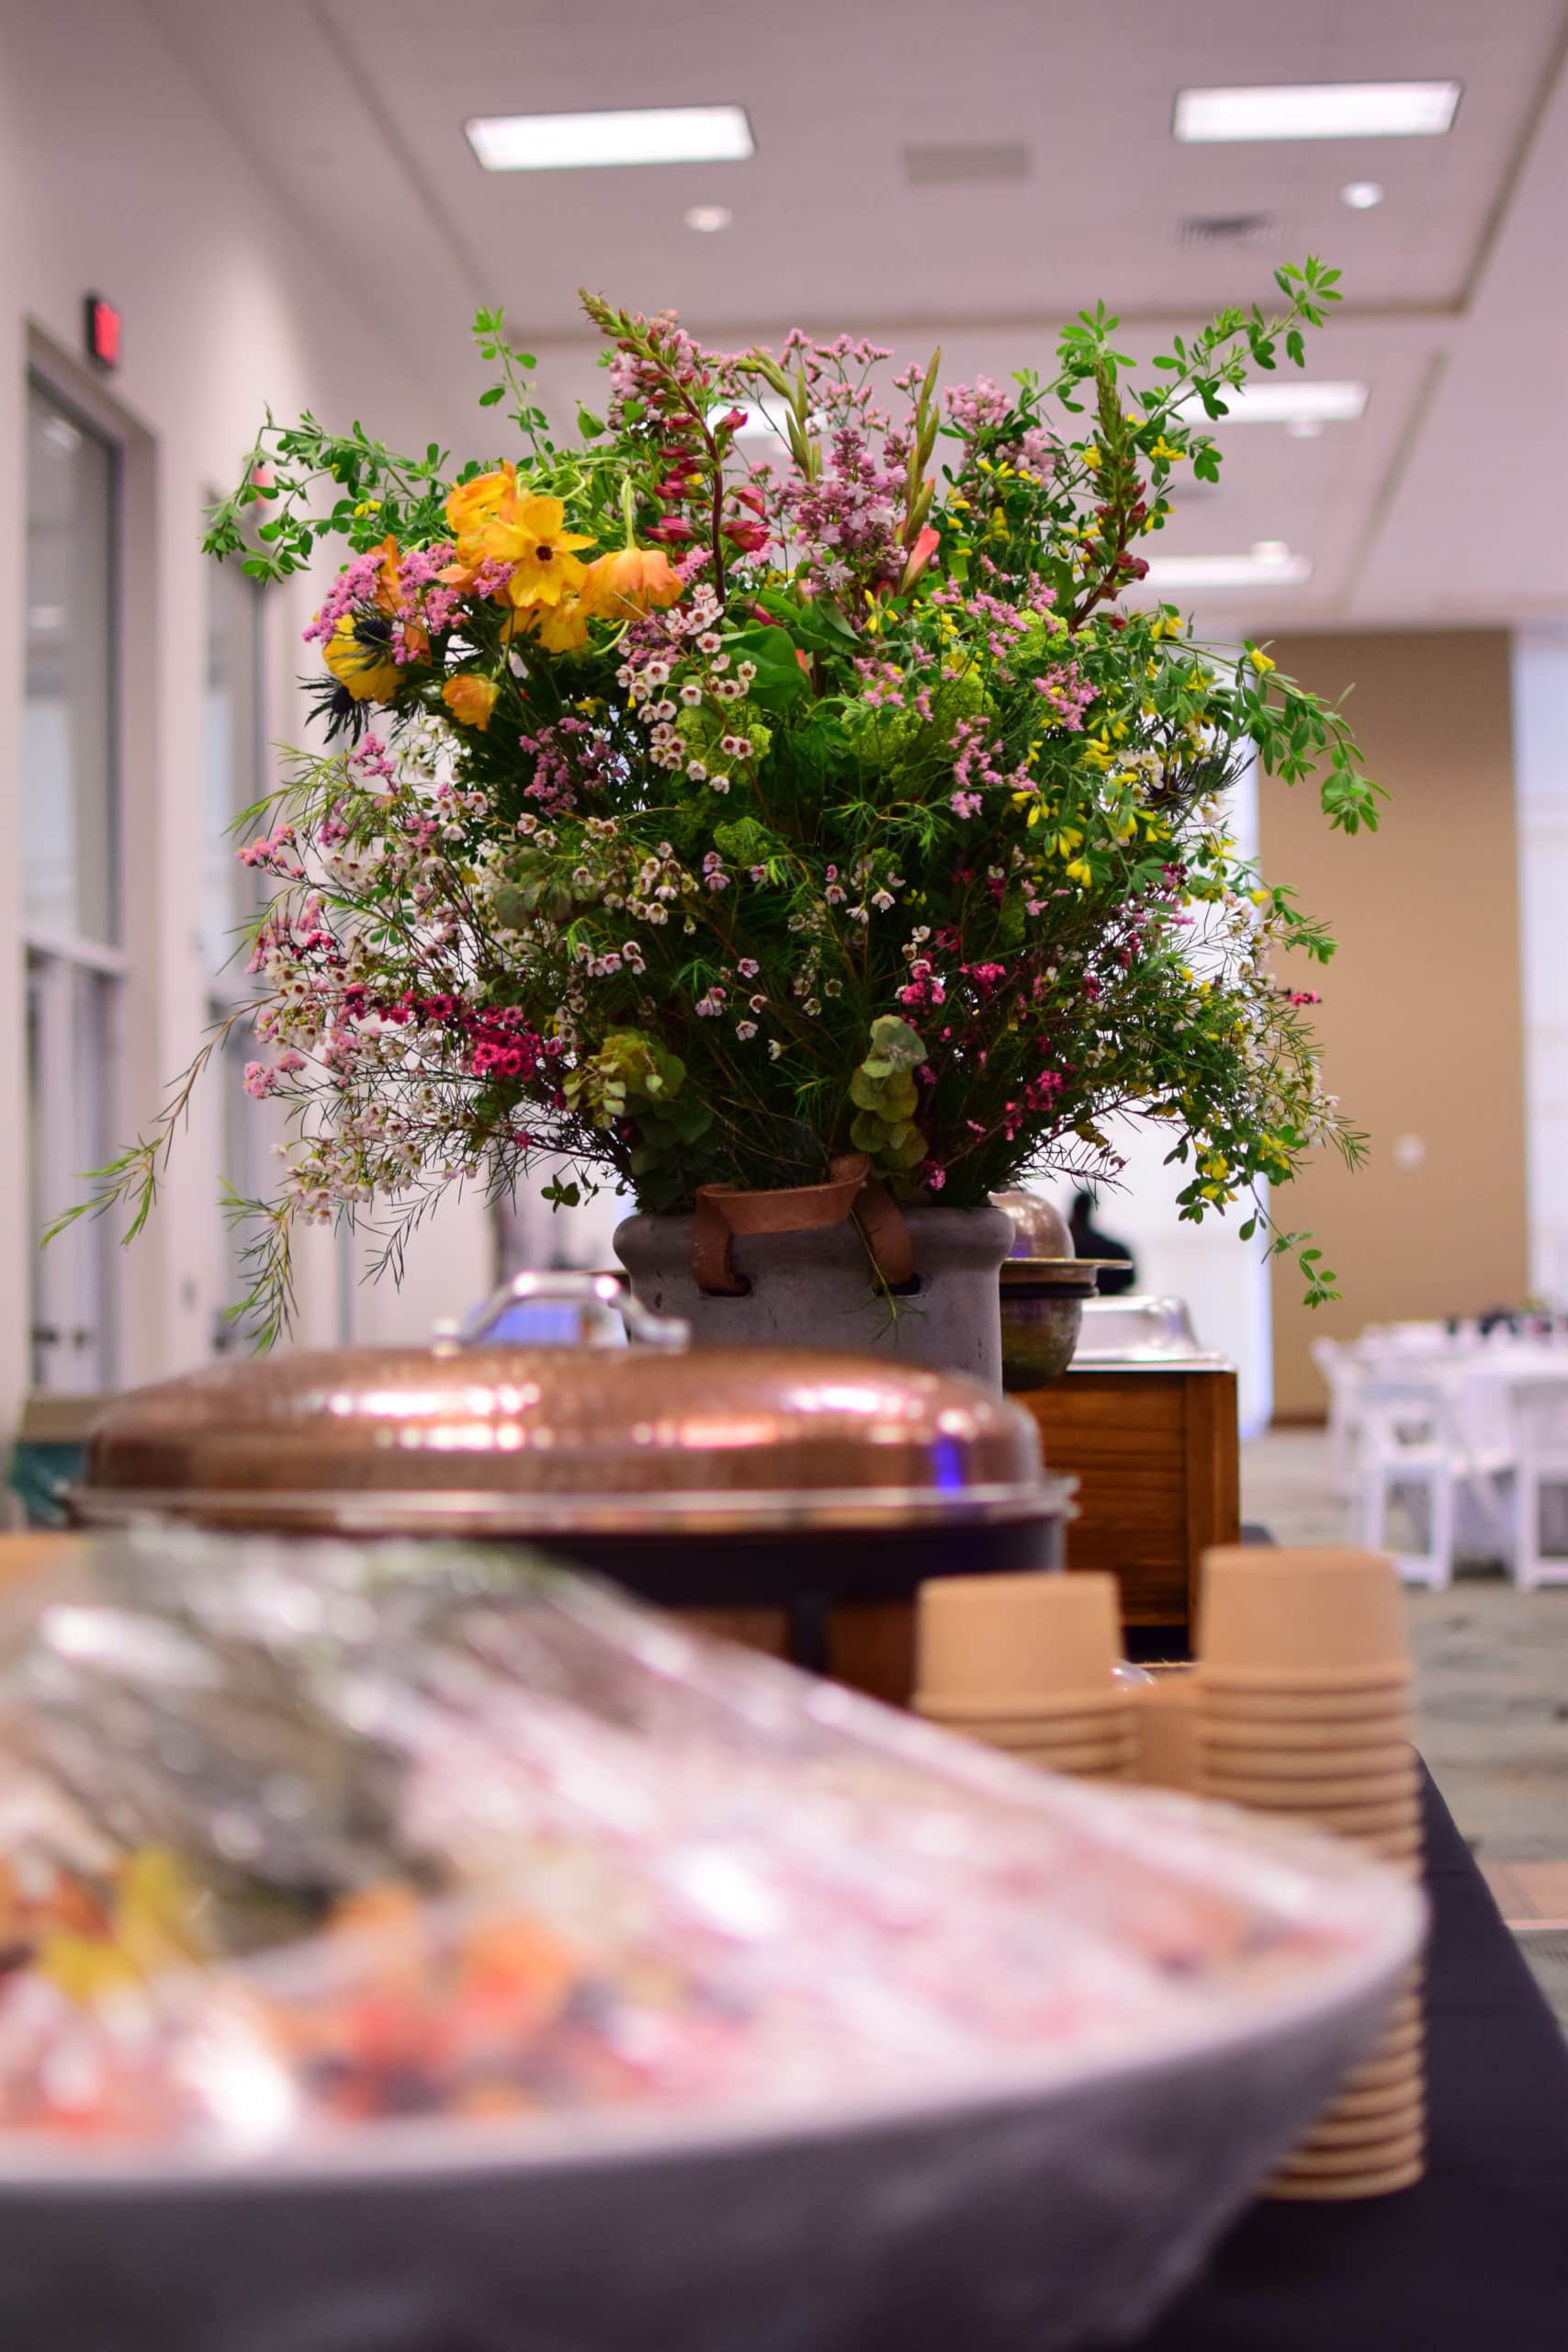 The breakfast buffet tablescape featured a huge bouquet of flowers.